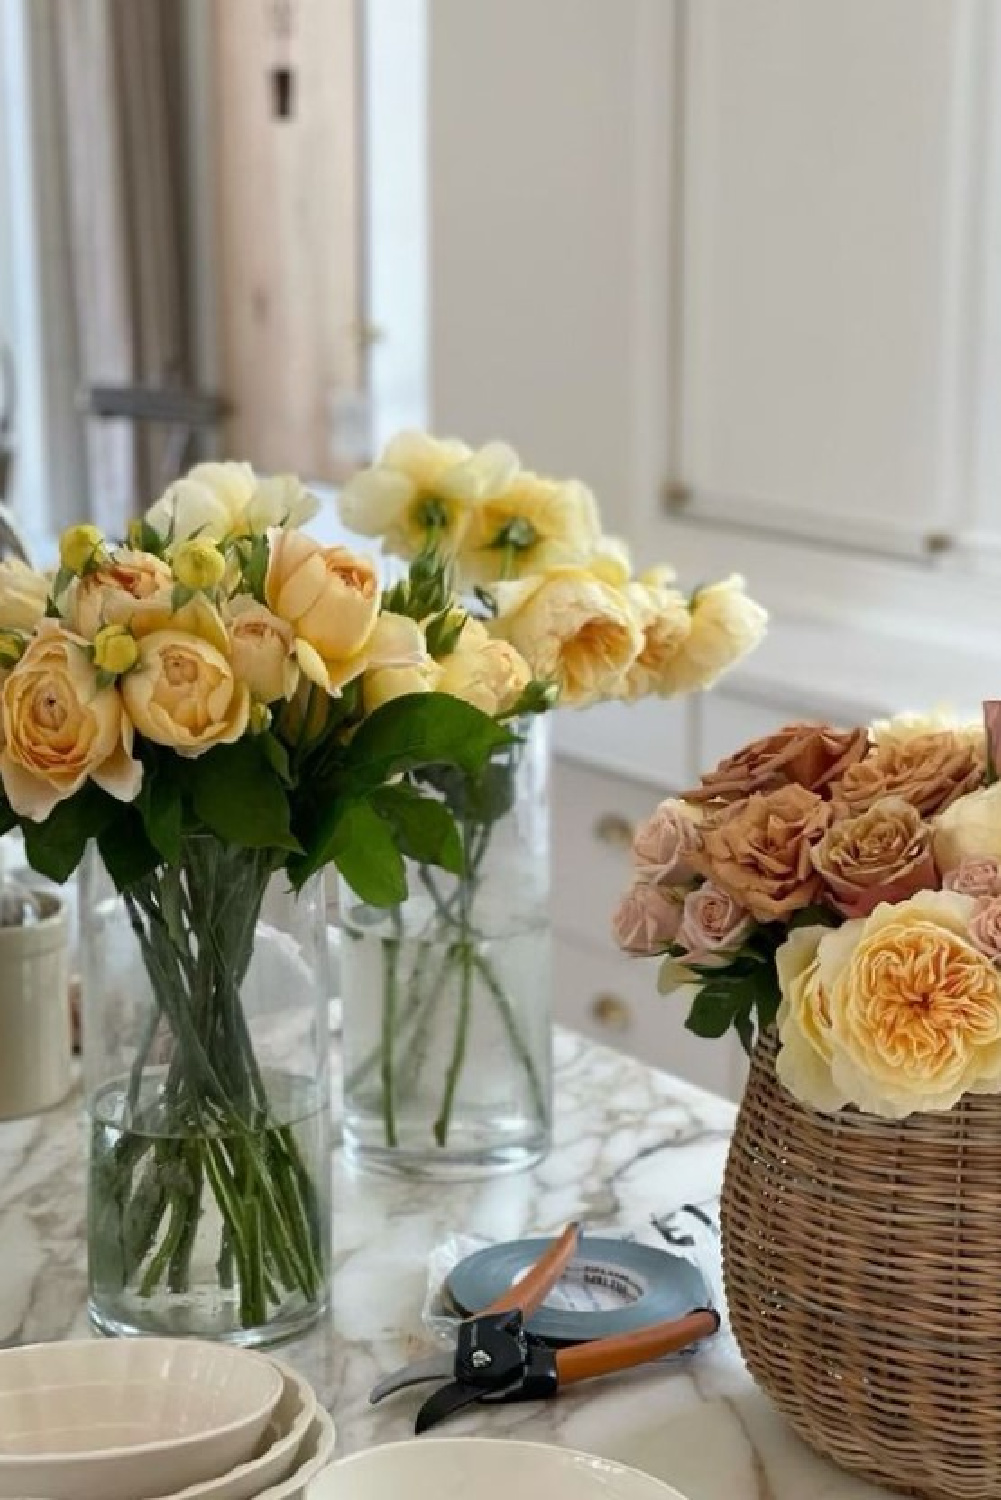 Assorted roses in the kitchen. Timeless interior design by Shannon Bowers with nods to European antiques, patina, understated elegance, and sophisticated simplicity. #shannonbowers #timelessinteriors